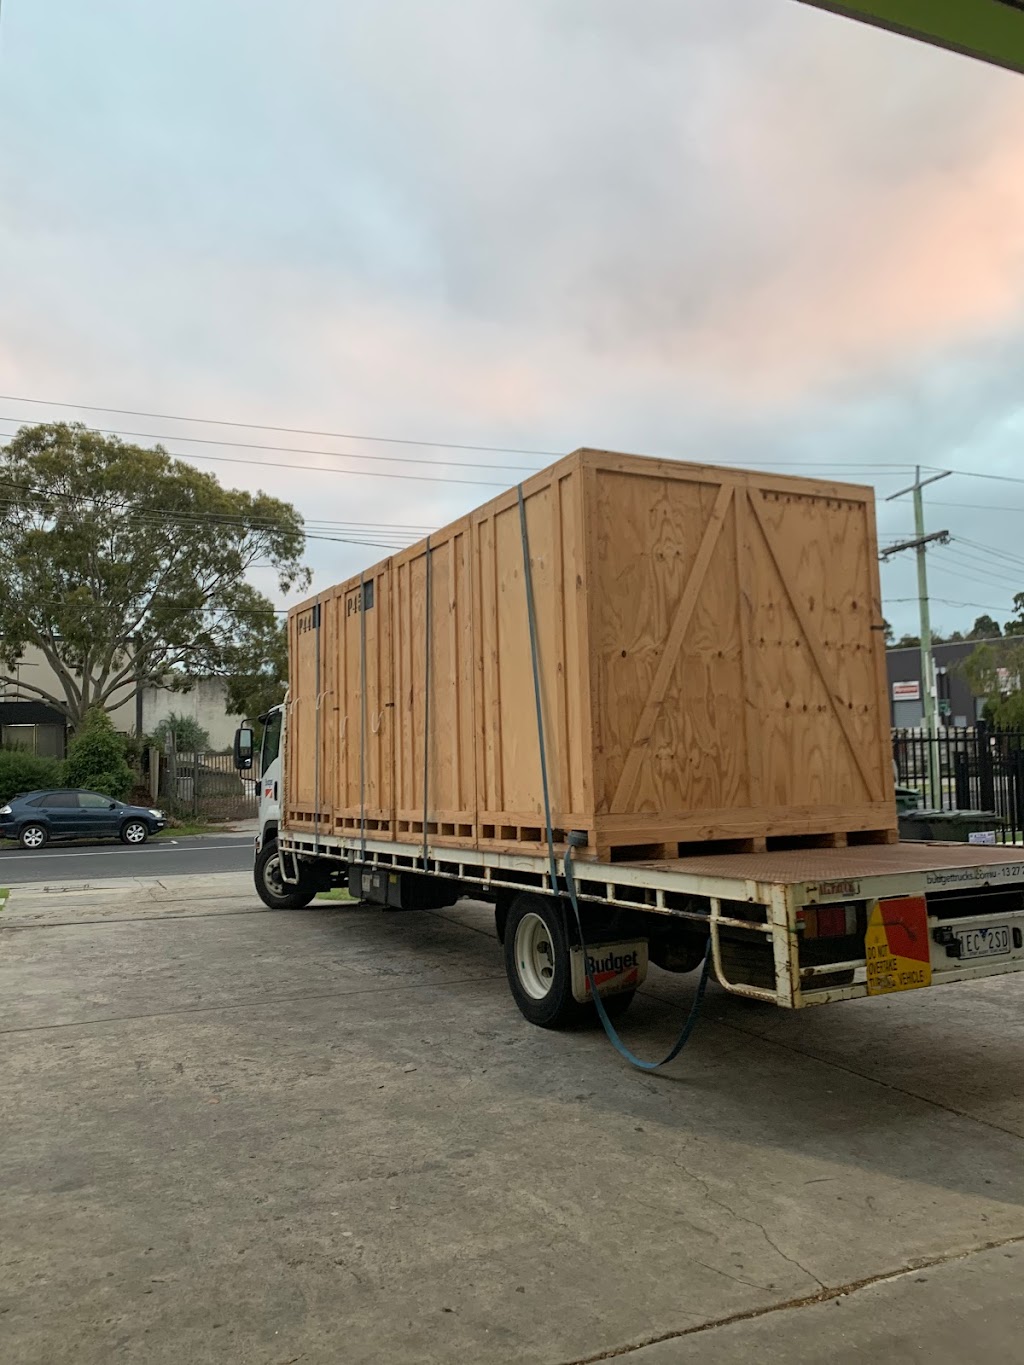 Southern Peninsula Removals and Storage | 6/69 Seaview Ave, Safety Beach VIC 3936, Australia | Phone: 0488 647 684